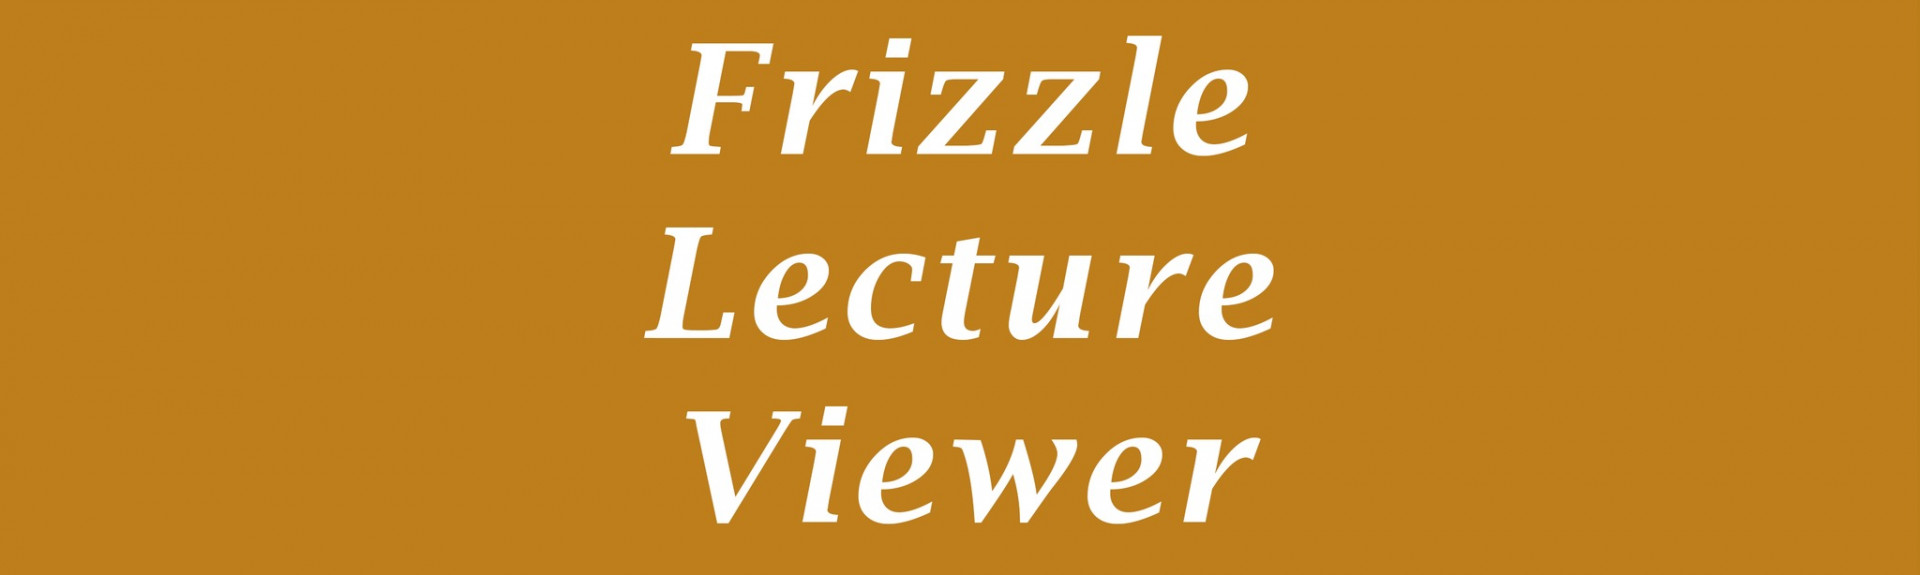 Frizzle Lecture Viewer